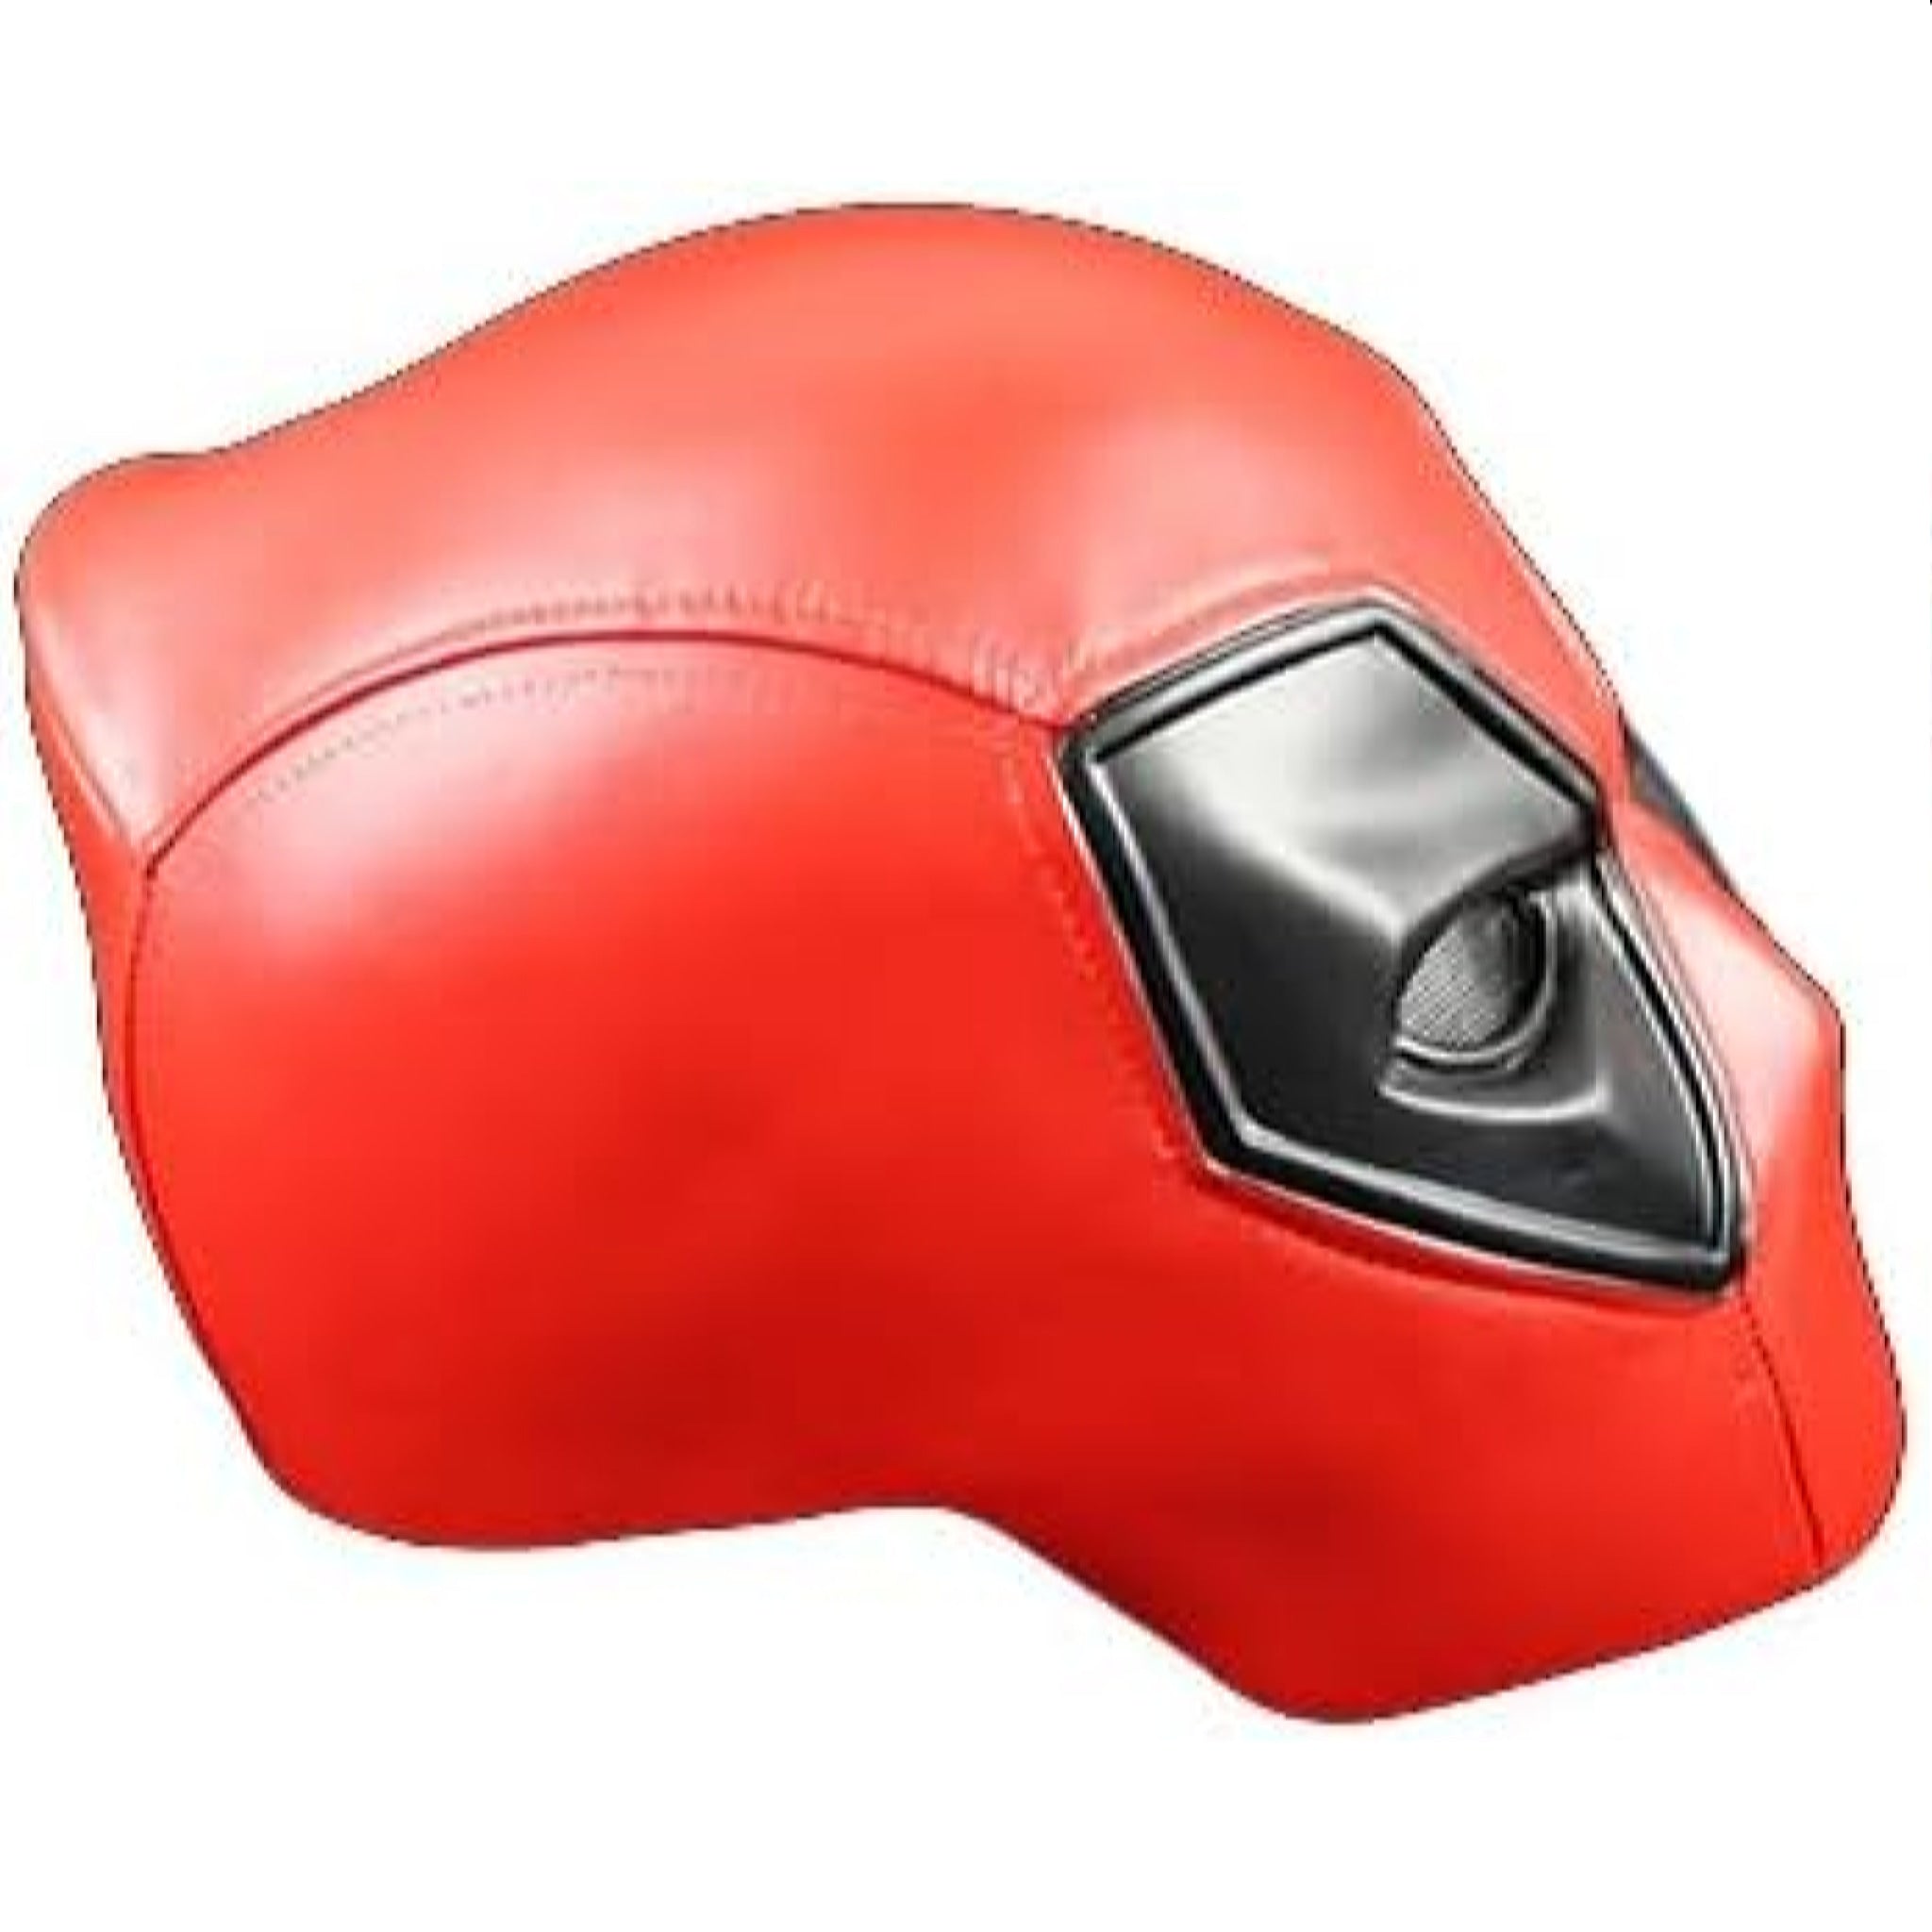 Deadpool Merc with a Mouth Resin Mask Fancy Dress Cosplay Halloween TZ-AB013